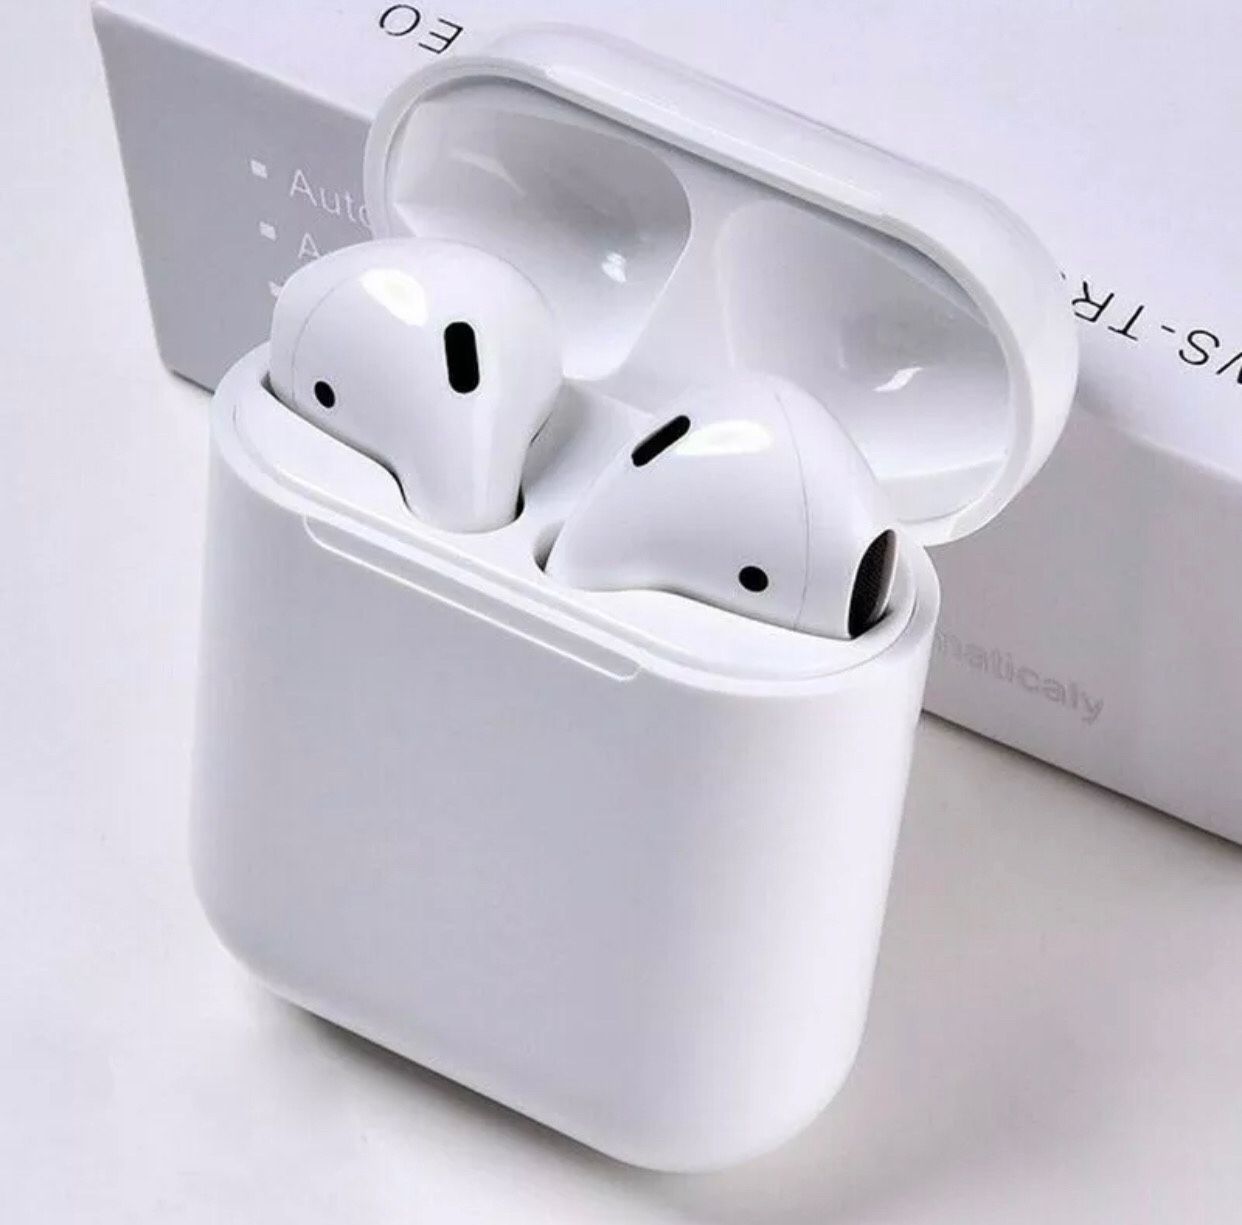 *NEW IN BOX* SALE wireless earbuds works for iPhone and Android NOT APPLE